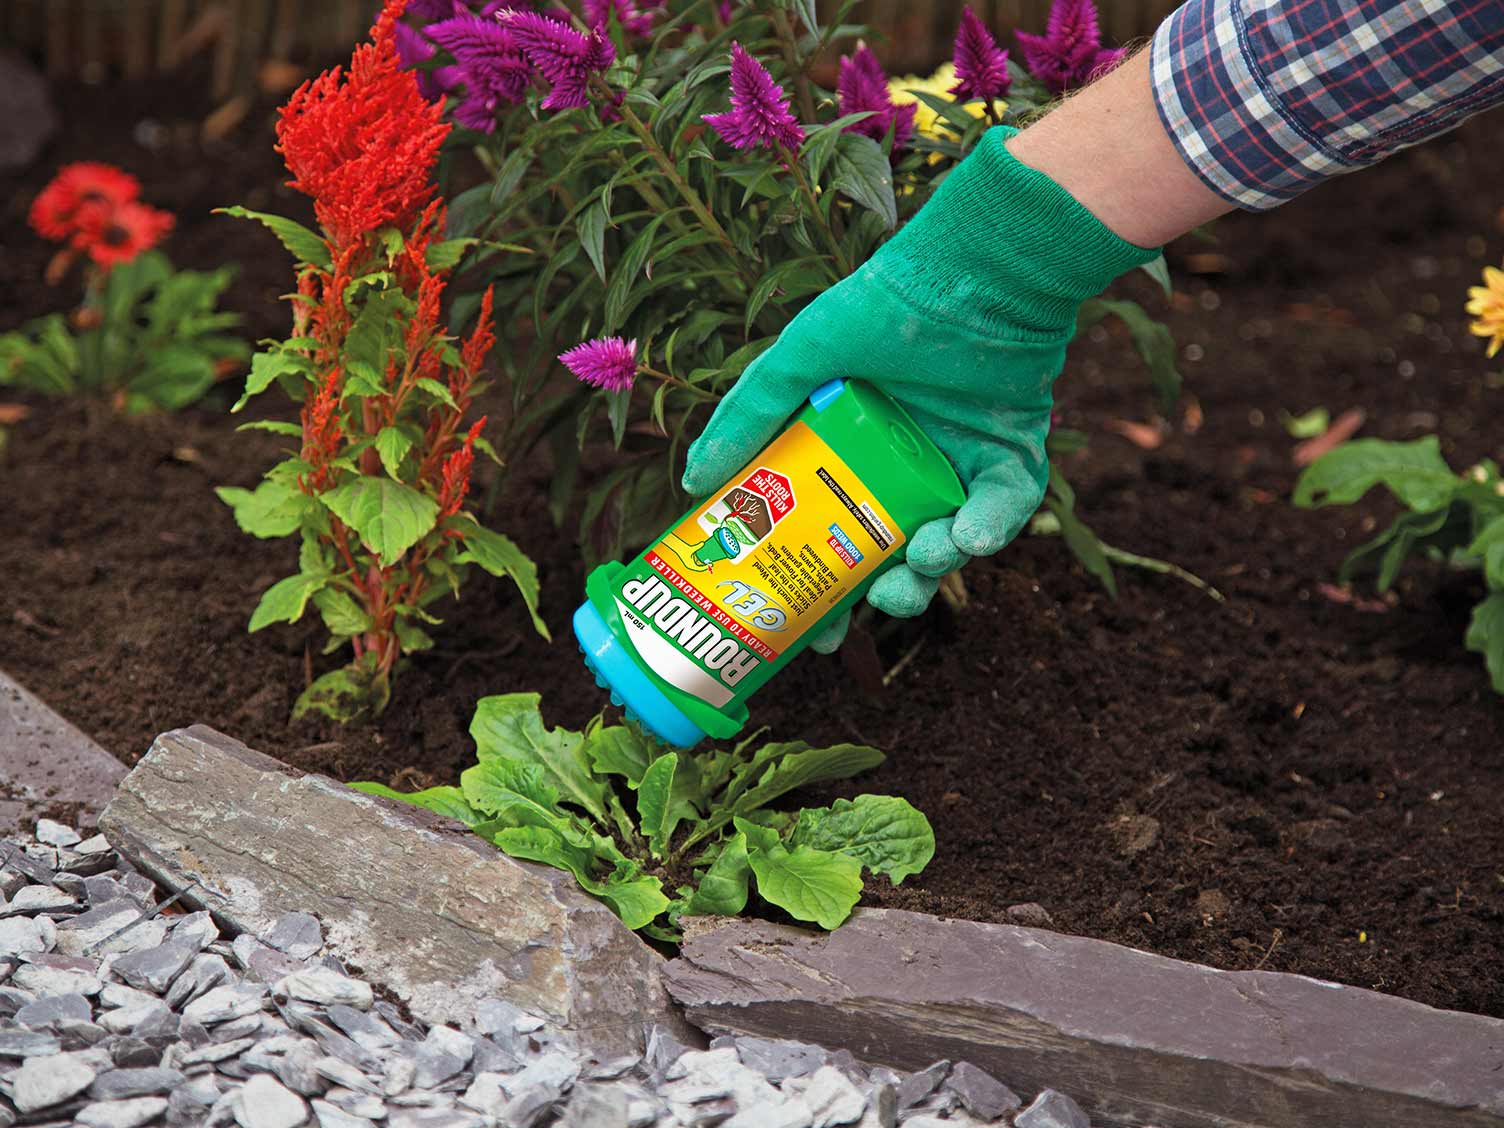 How to prevent weeds growing in flower beds